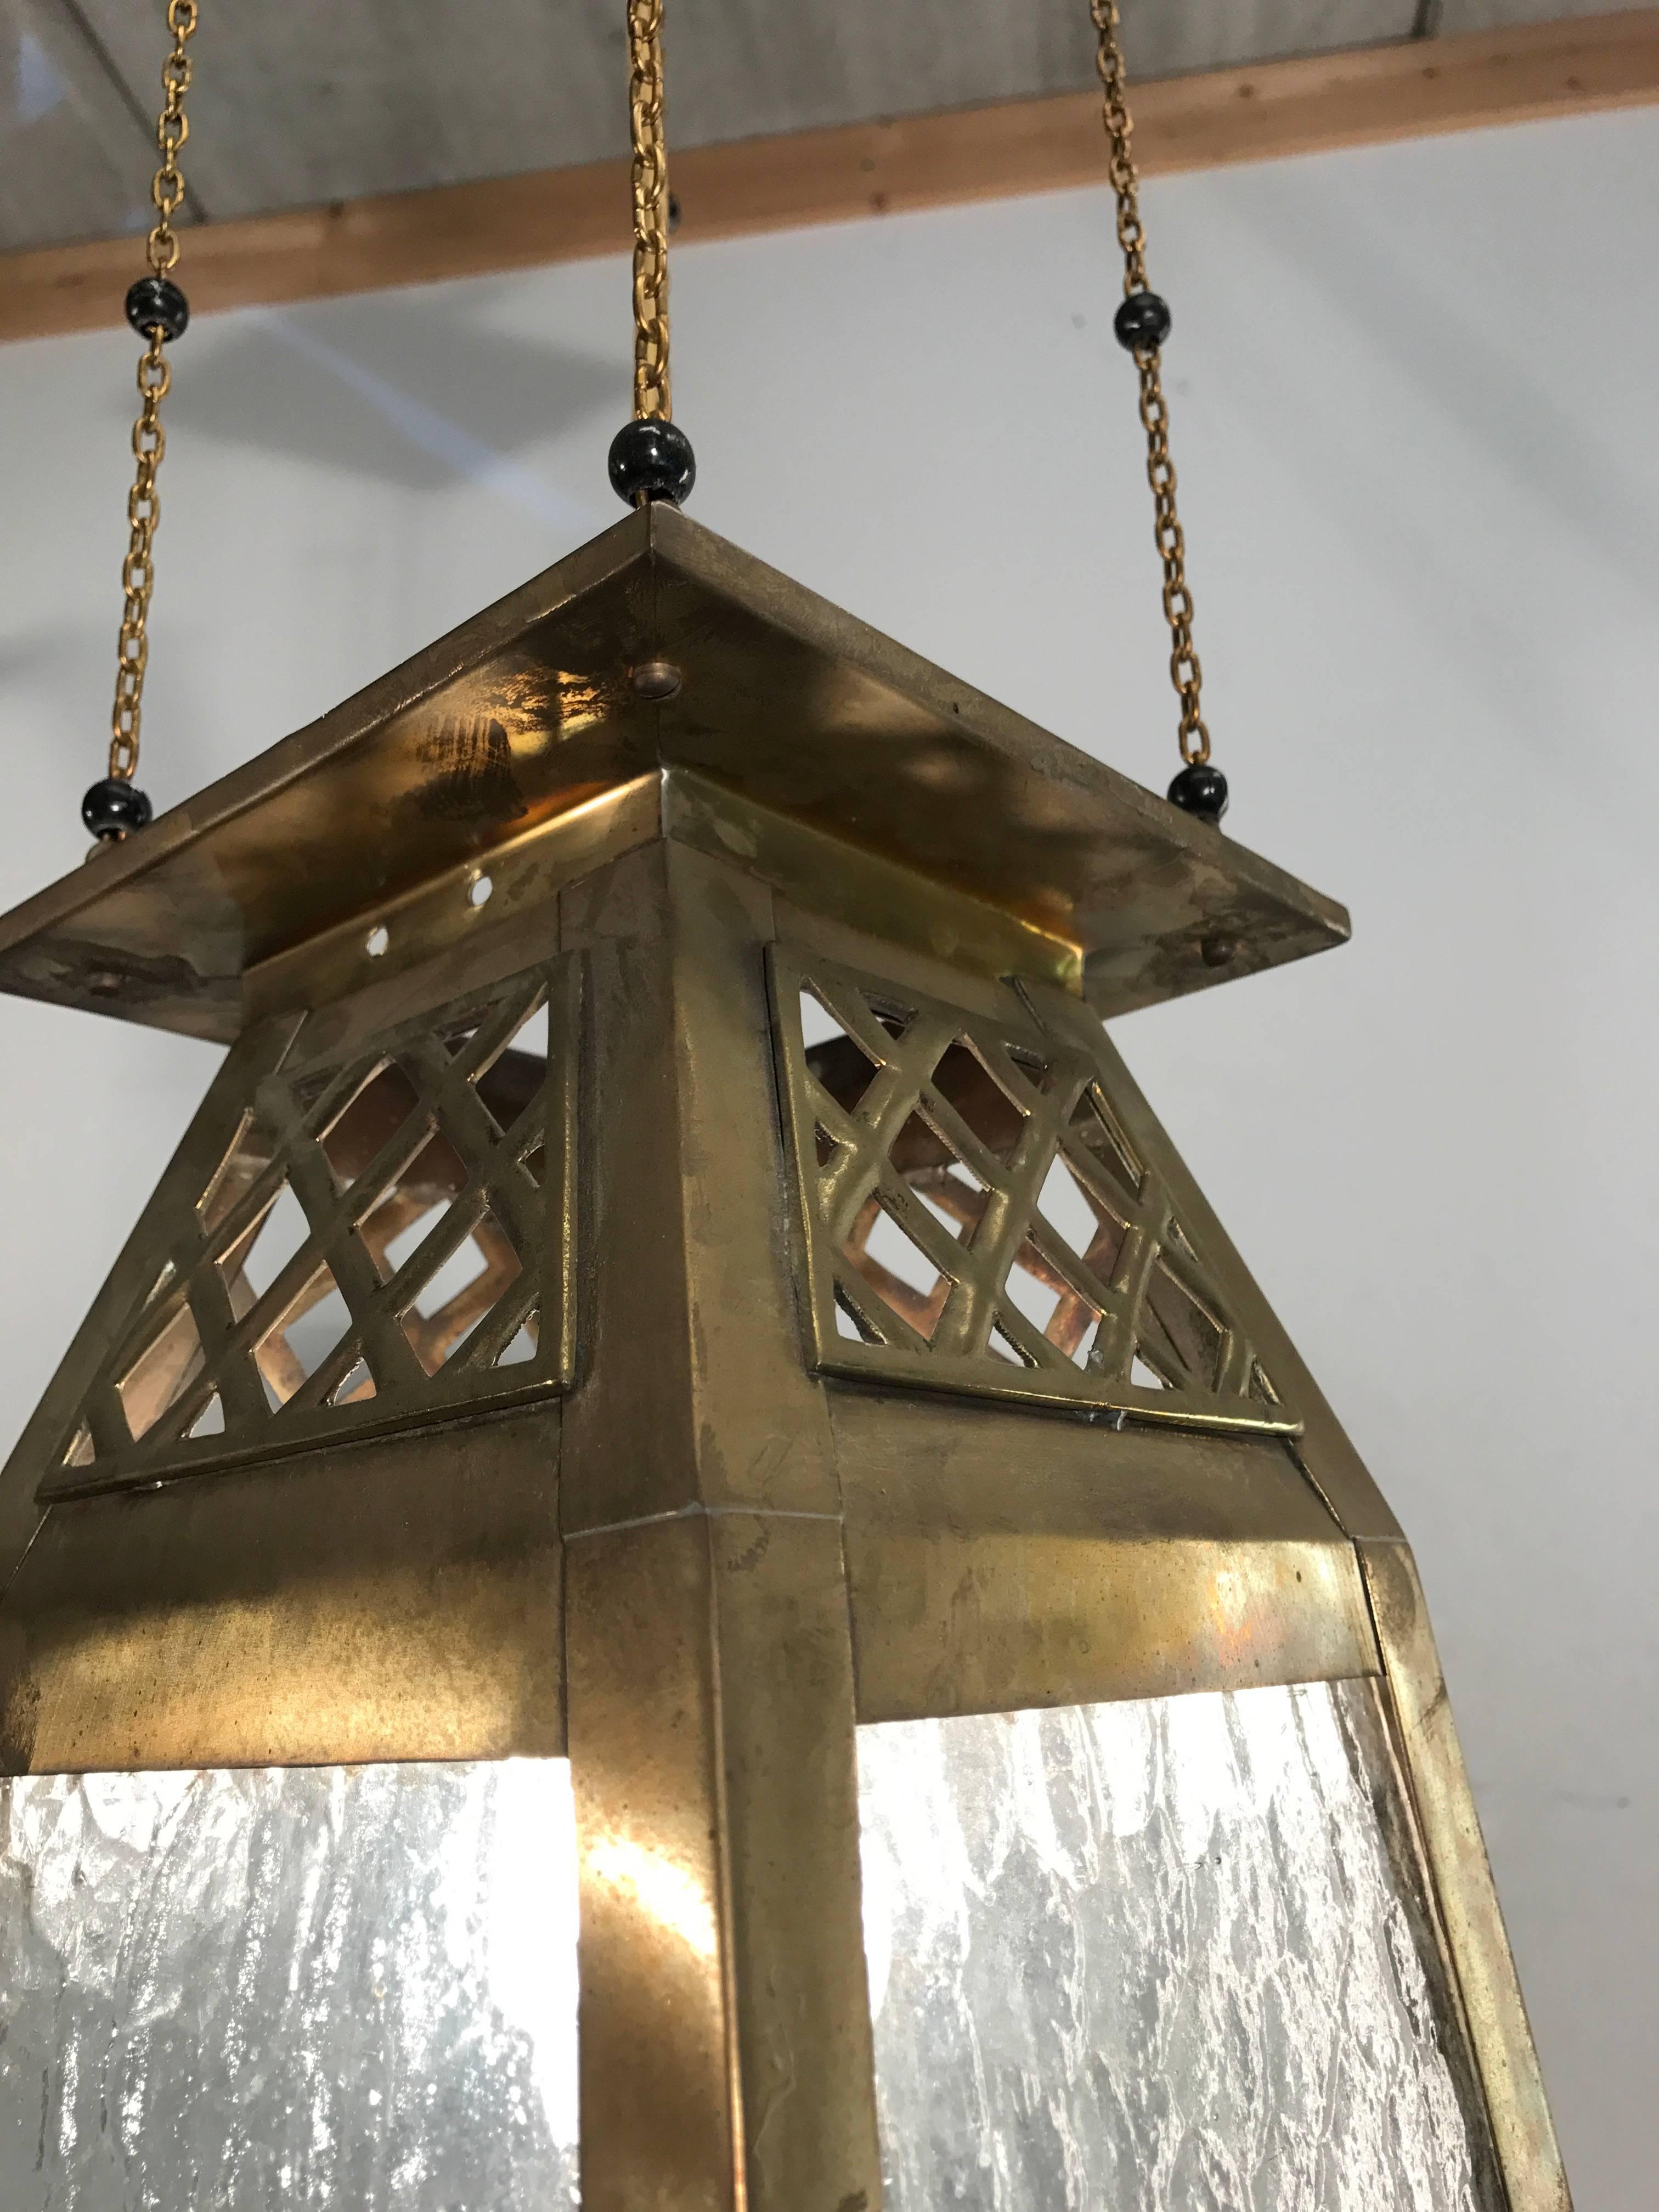 Good Looking, Early 1900s Arts and Crafts Pendant Brass and Glass Light Lantern 1